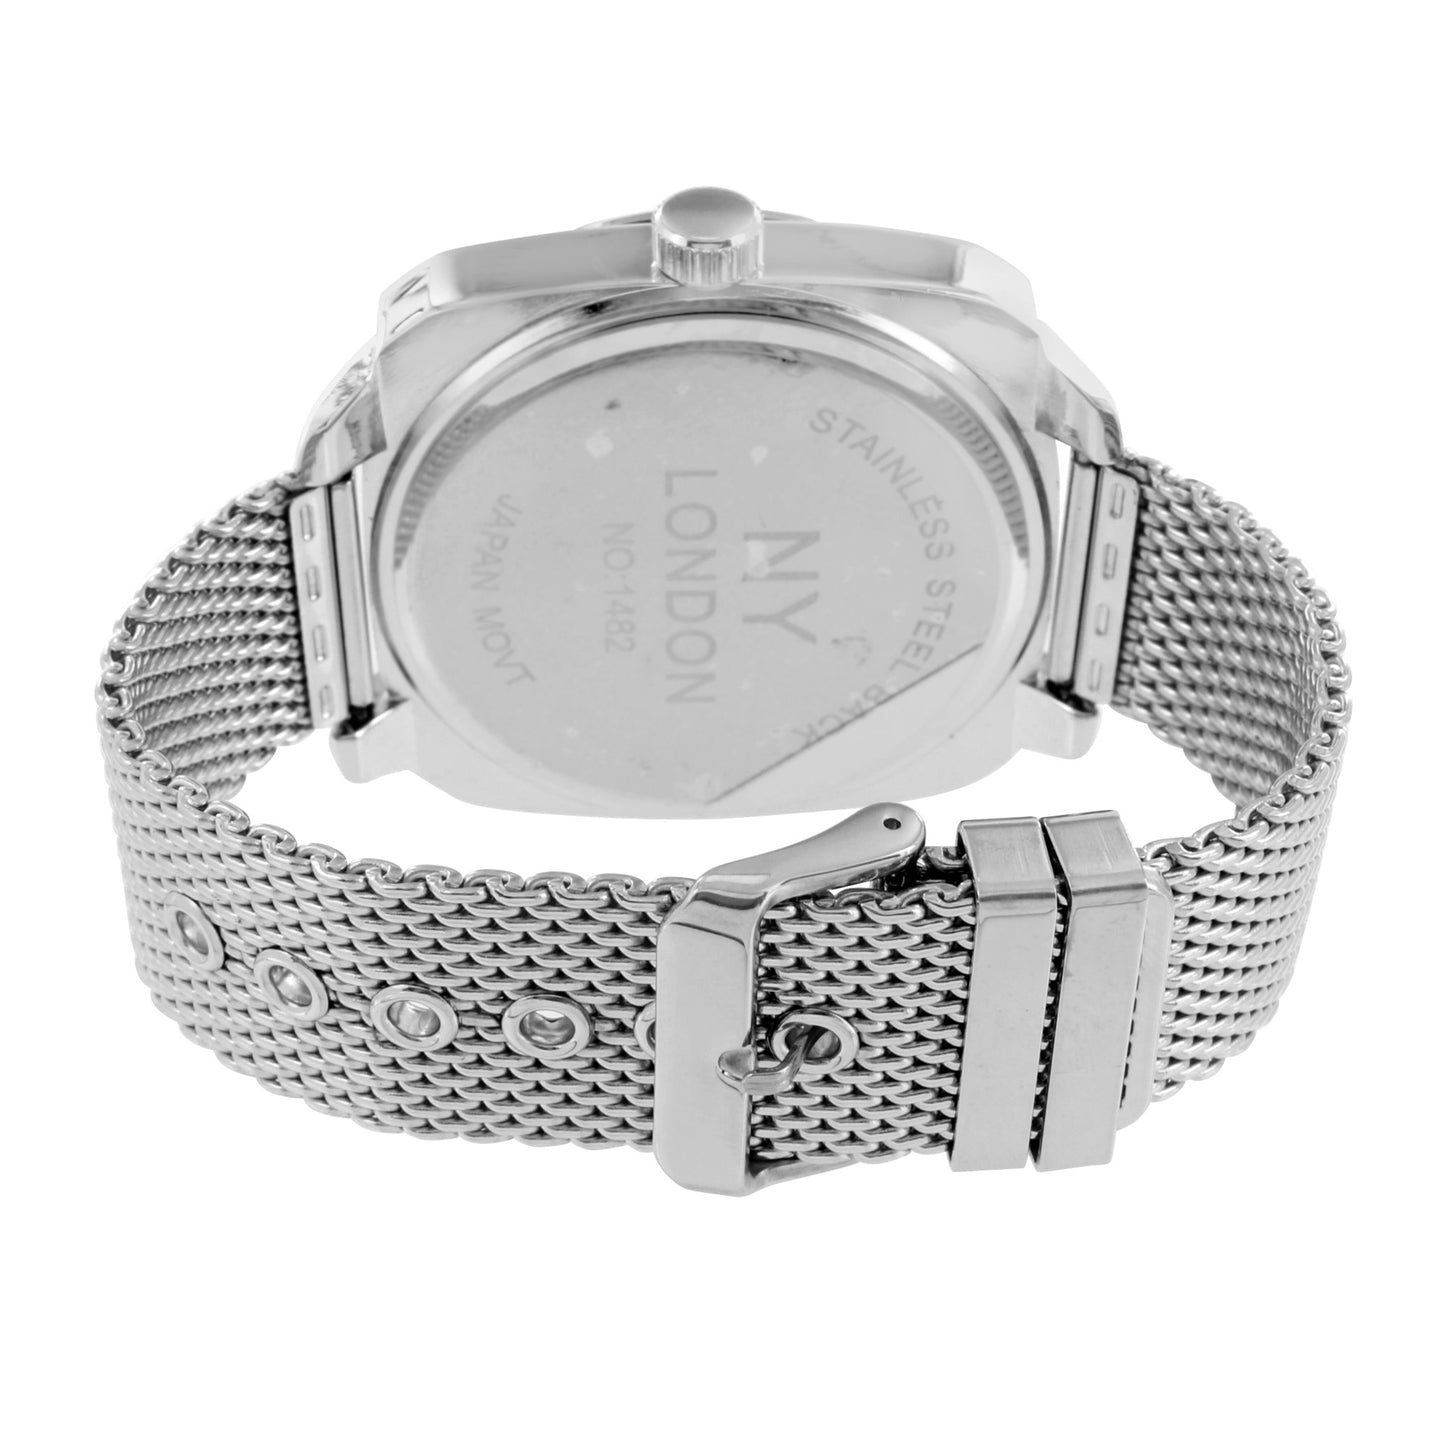 White Gold Tone Watch NY London  Mesh Band Water Resistant